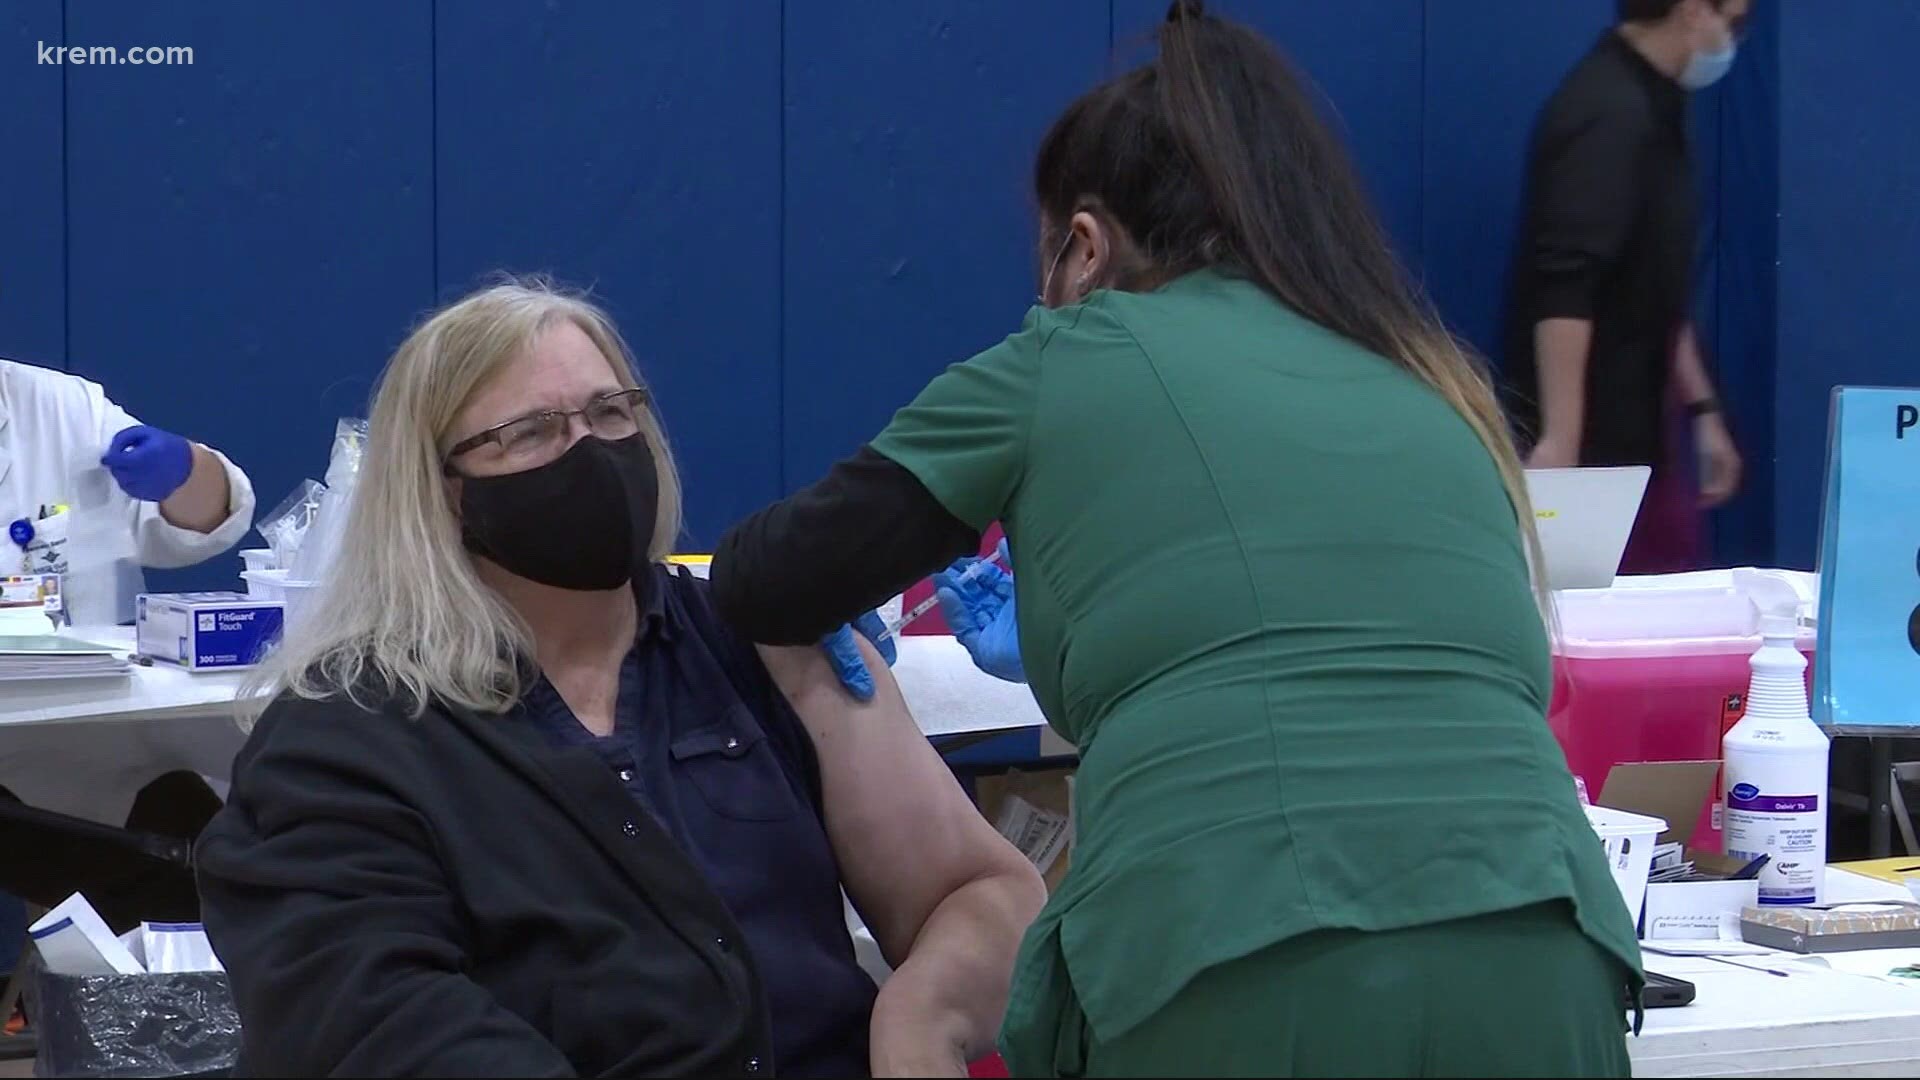 Community members do not need to be patients of CHAS Health to receive the vaccine at Spokane Community College. Here's what you need to know about the new clinic.